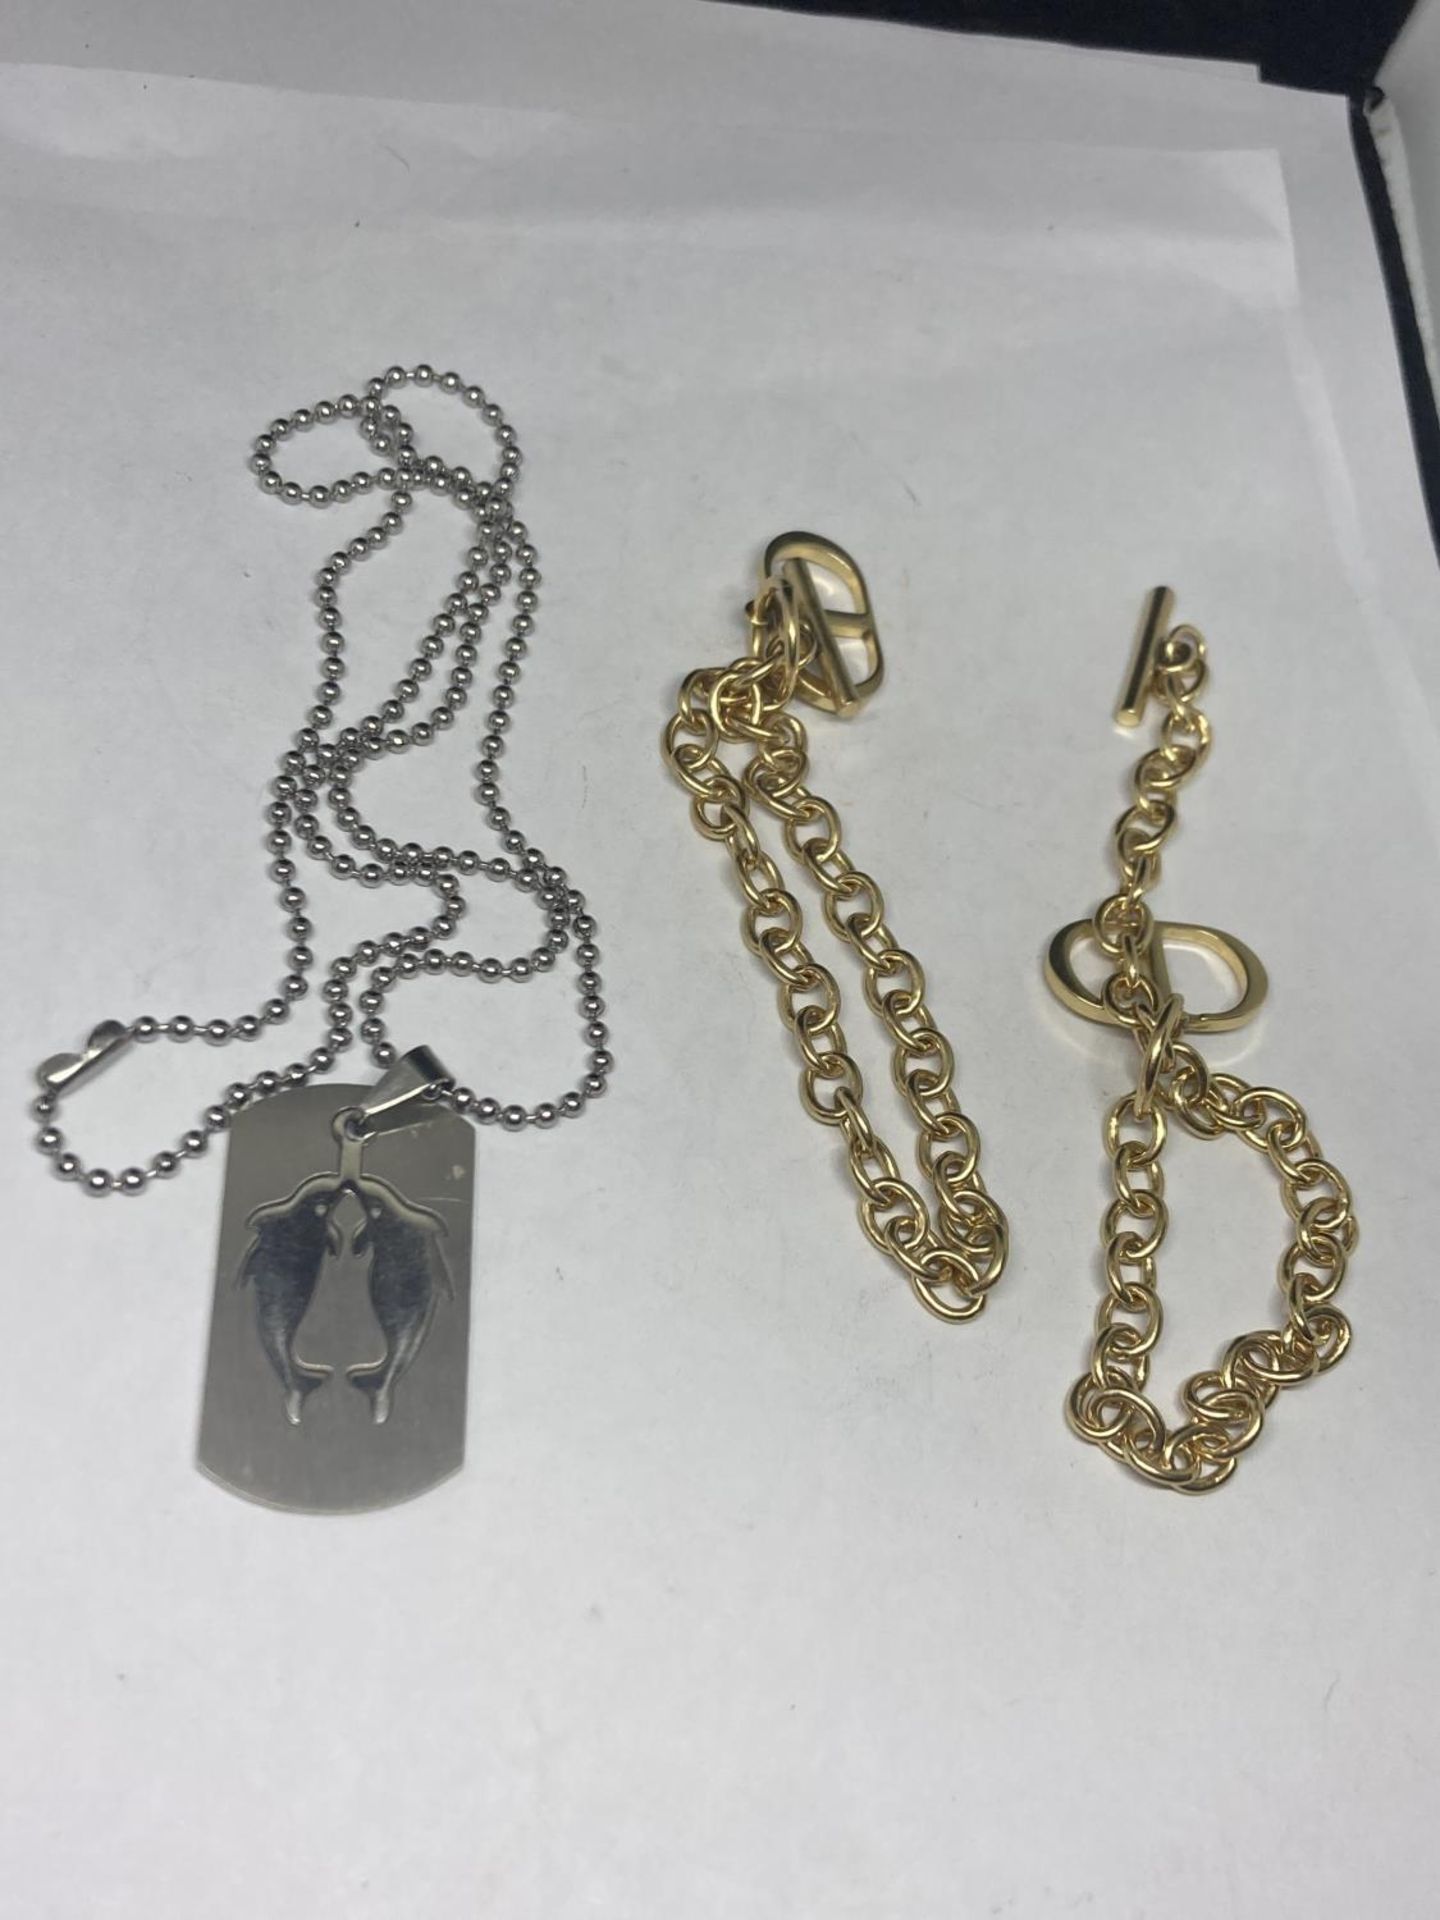 TWO GOLD PLATED T BAR BRACELETS AND A WHITE METAL DOLPHIN PENDANT NECKLACE